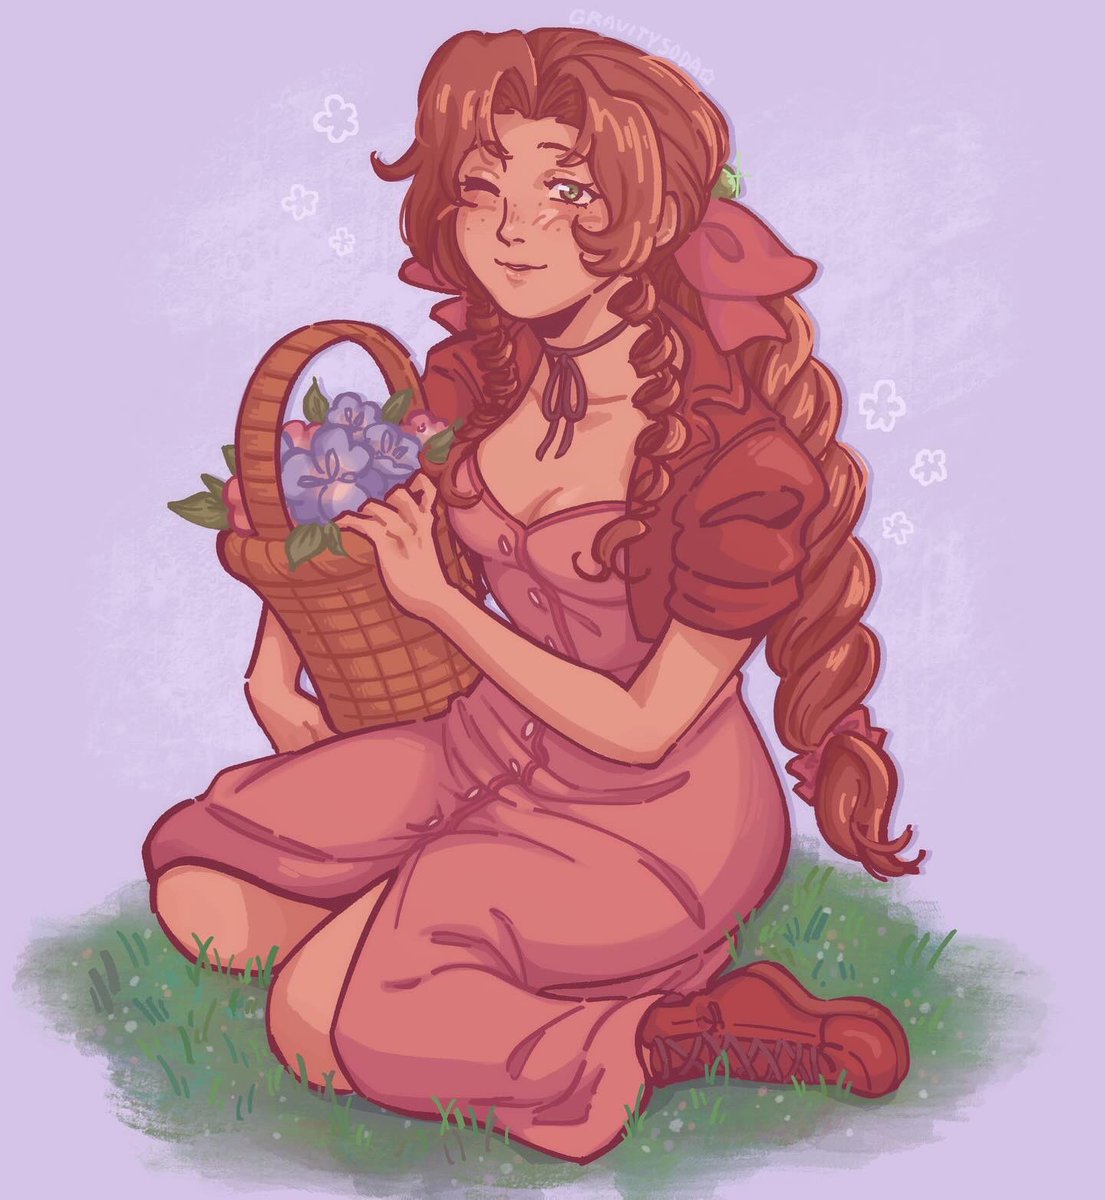 og ffvii aerith has a very special place in my heart she is so so so CUTE!!! i miss her og dress and big giant bangs and bow